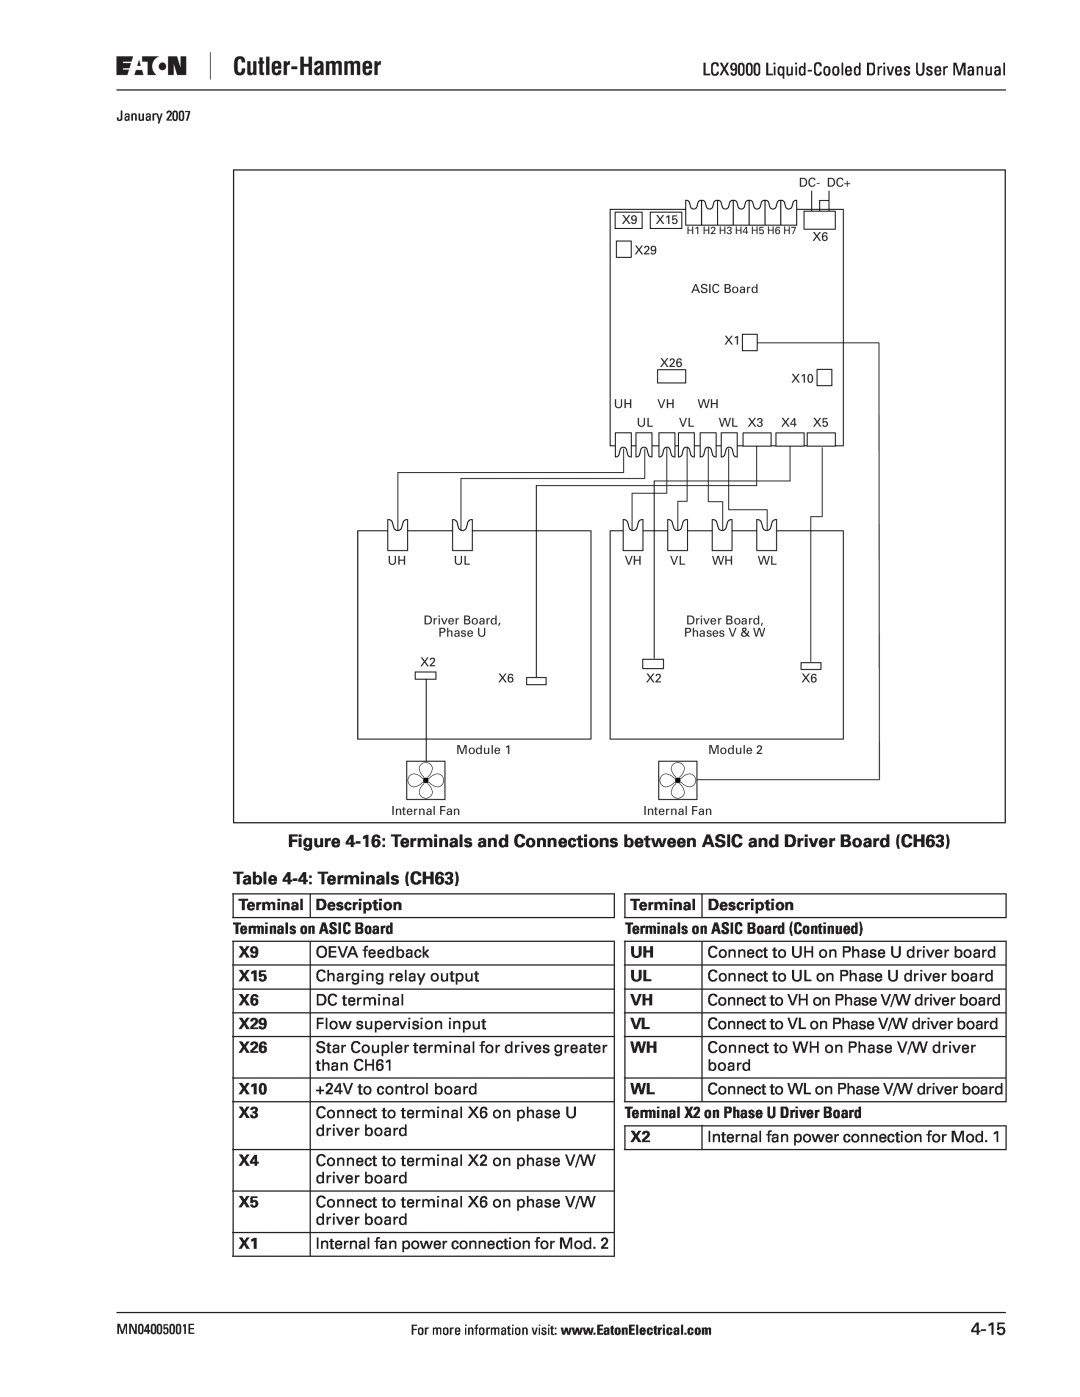 J. T. Eaton LCX9000 user manual 4 Terminals CH63, Connect to WL on Phase V/W driver board 